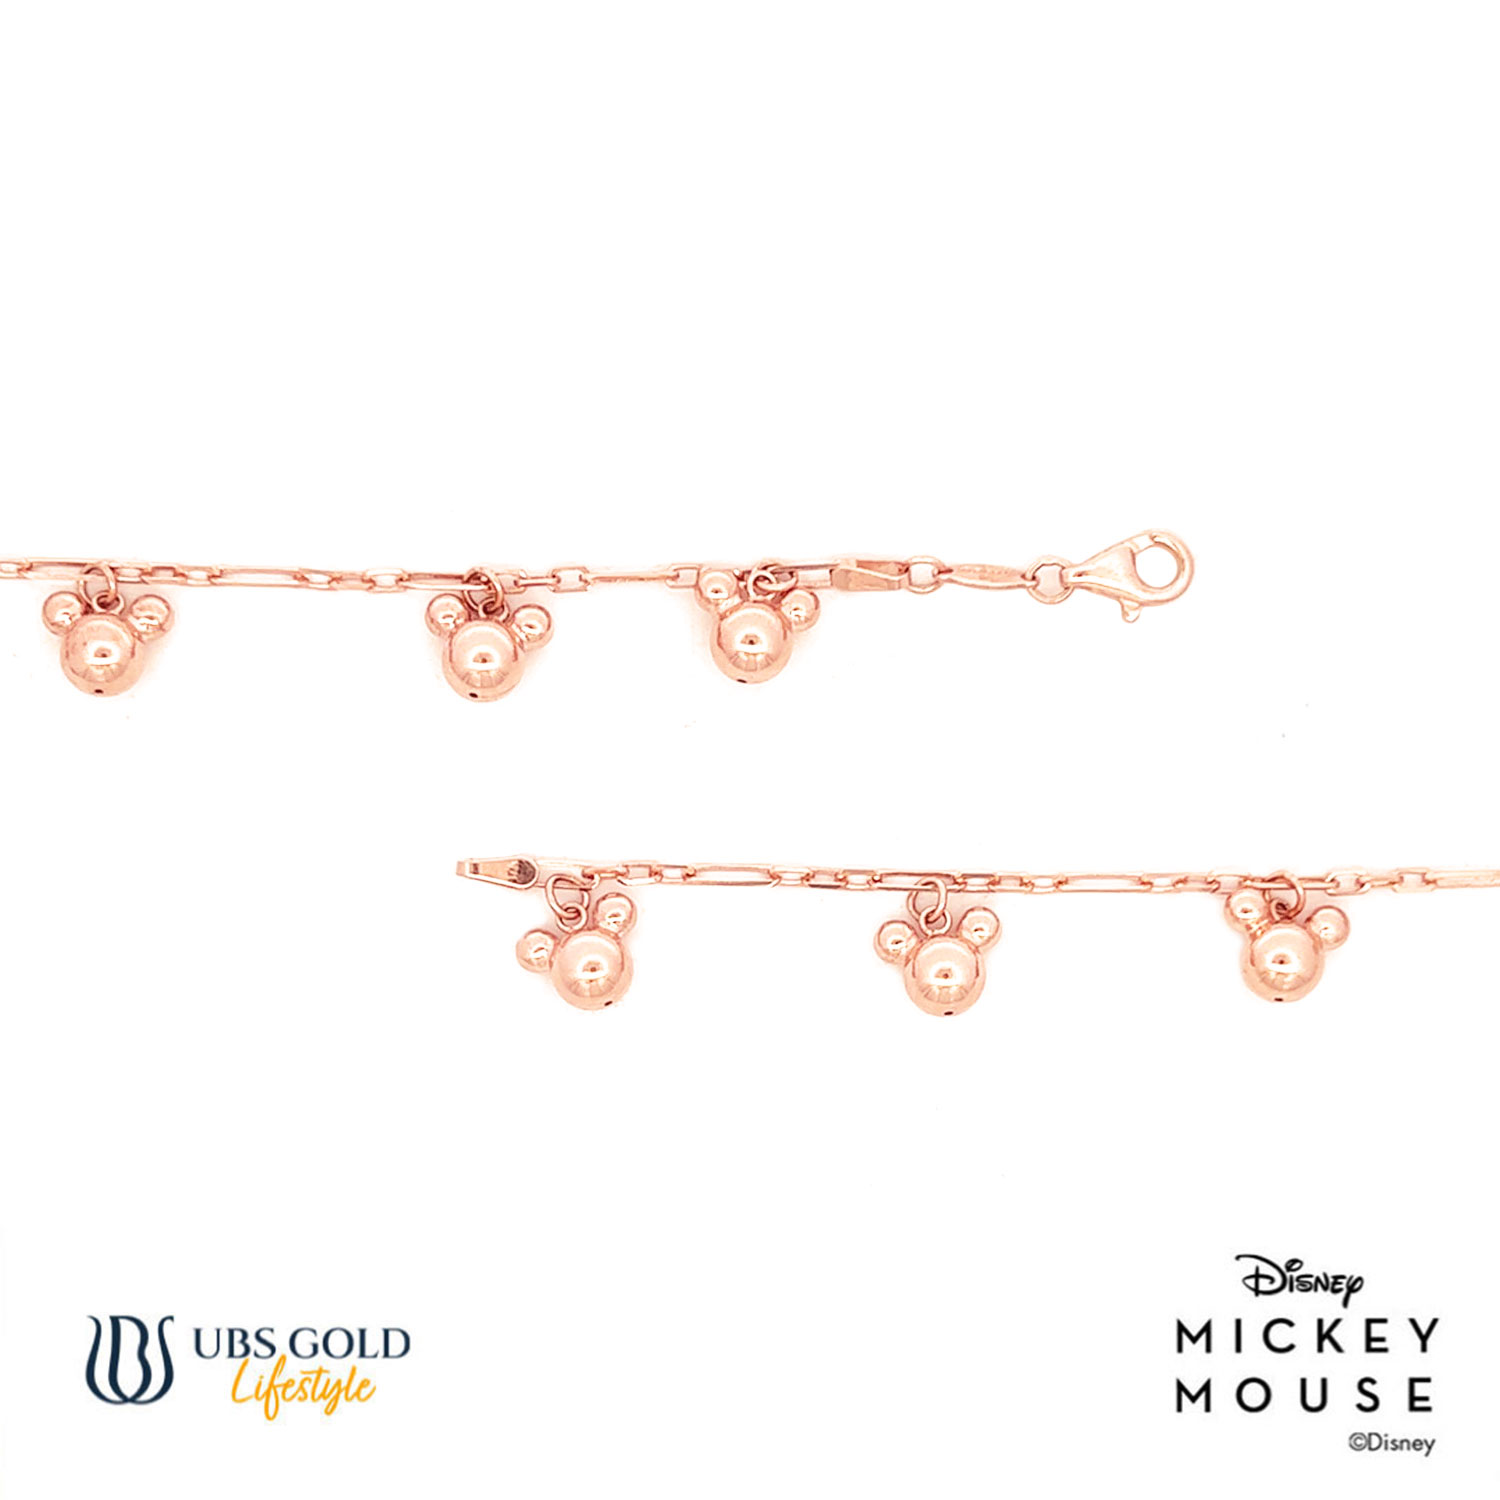 UBS Gold Gelang Emas Disney Mickey Mouse - Kgy0099G - 17K